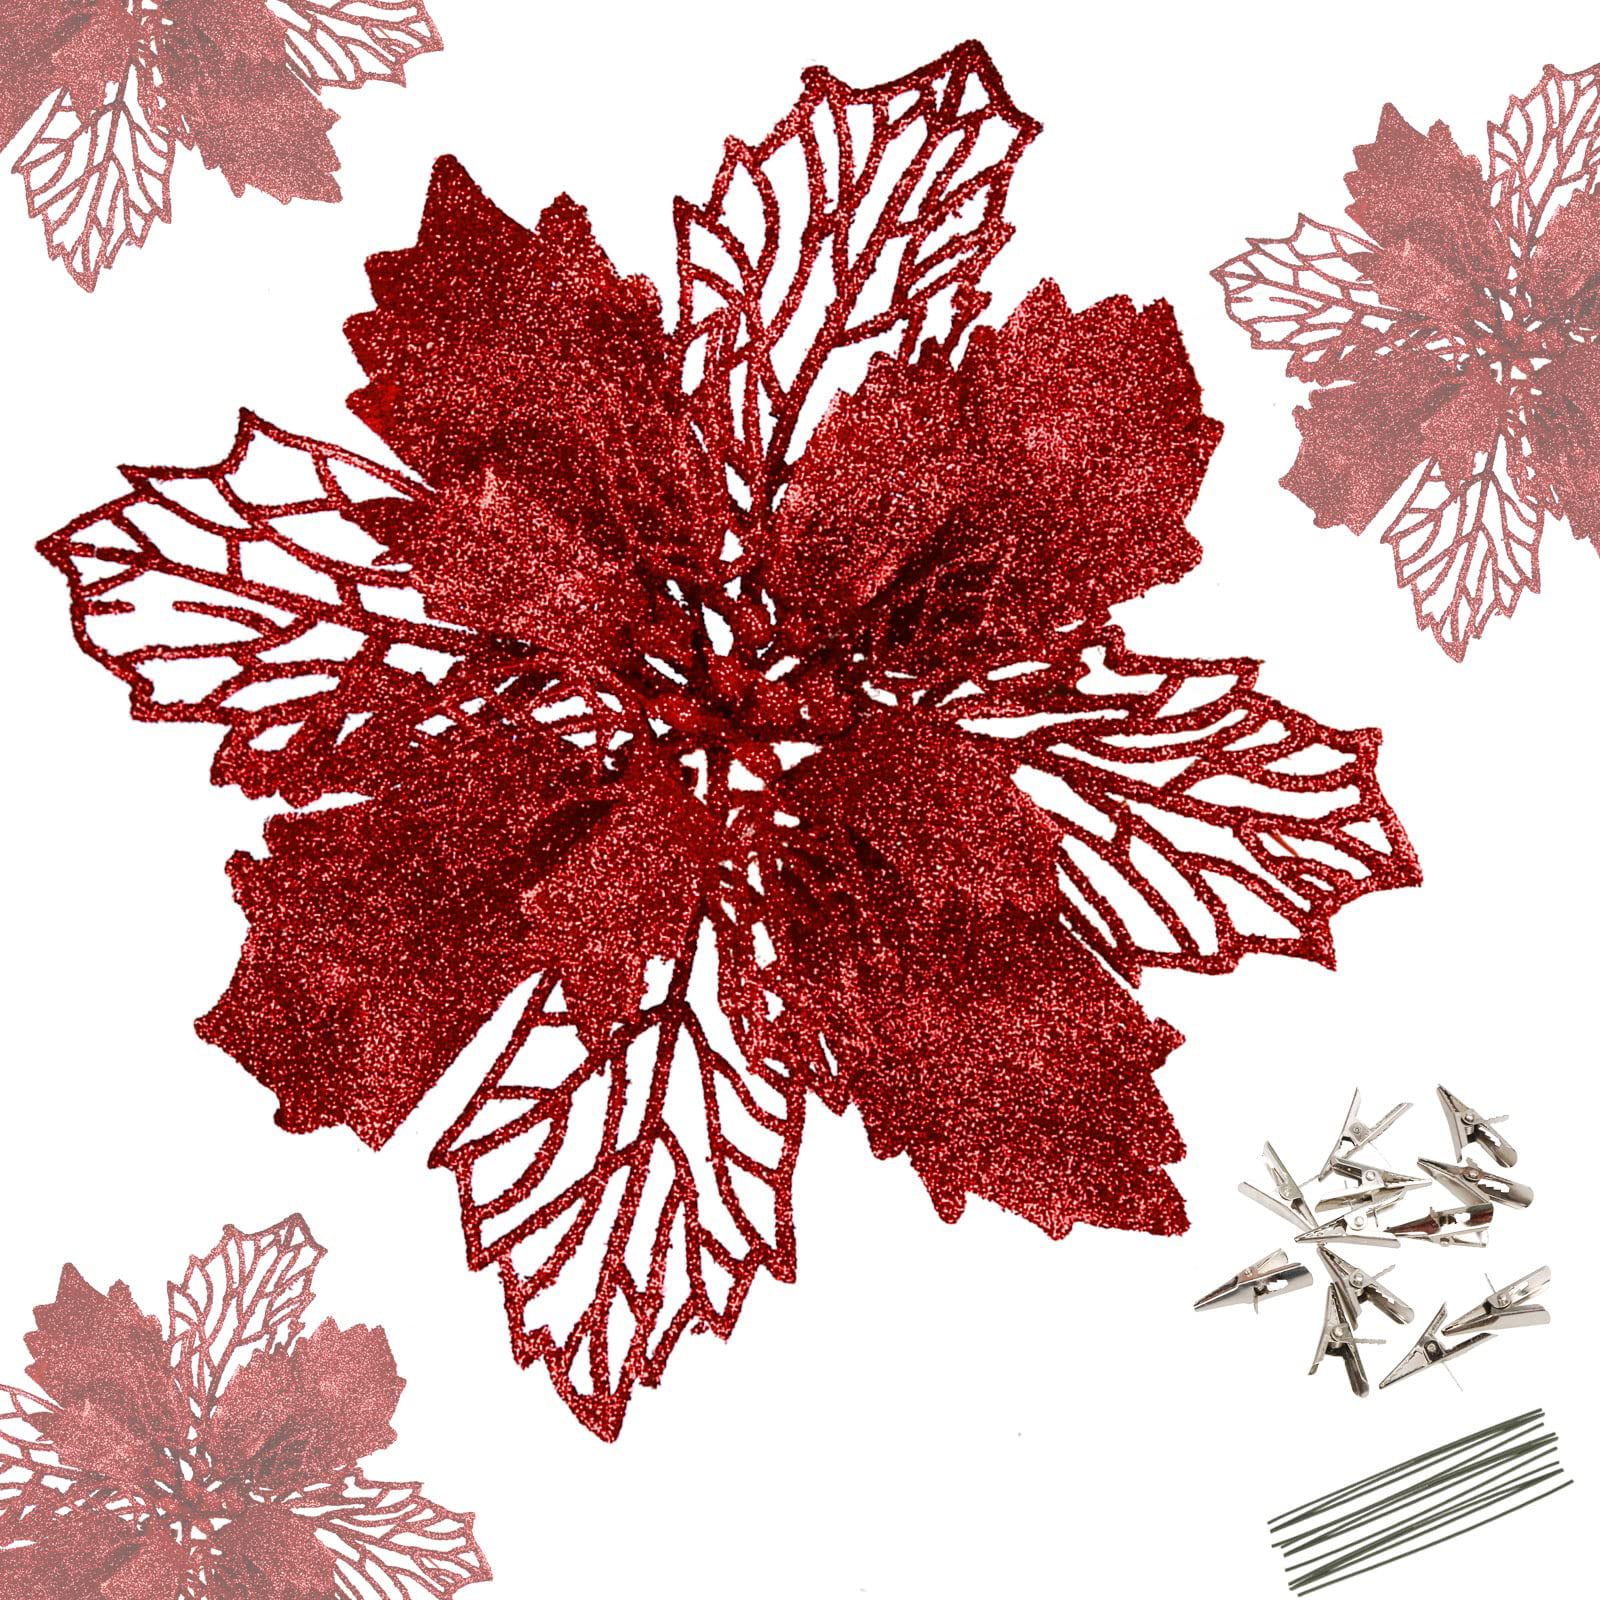 Details about   Christmas Large Poinsettia Glitter Flower Tree Hanging Party Xmas Decor NEW HOT 